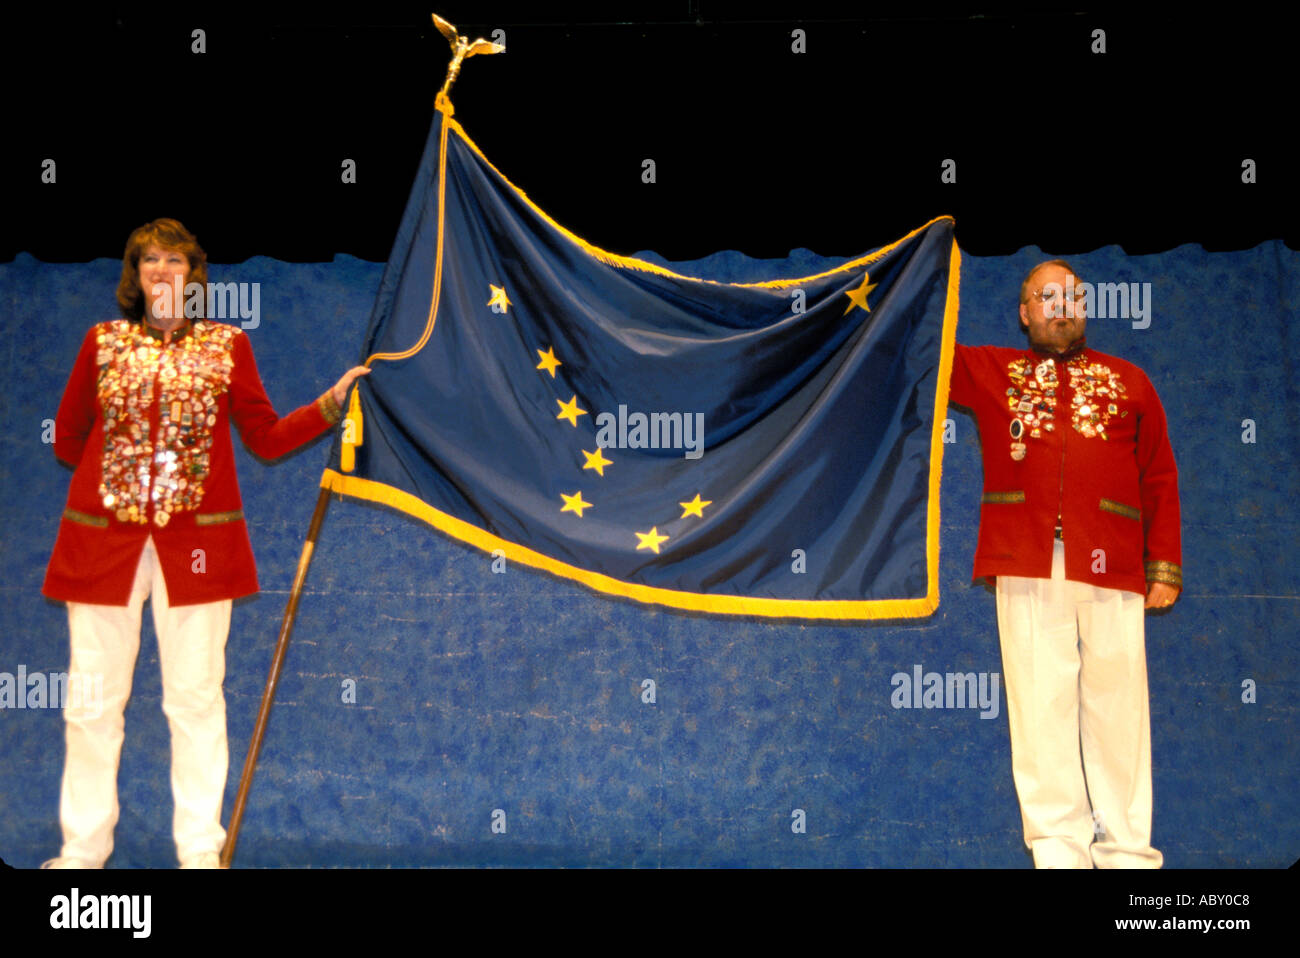 The Alaska Flag Denoting The Big Dipper And The North Star Seen In The